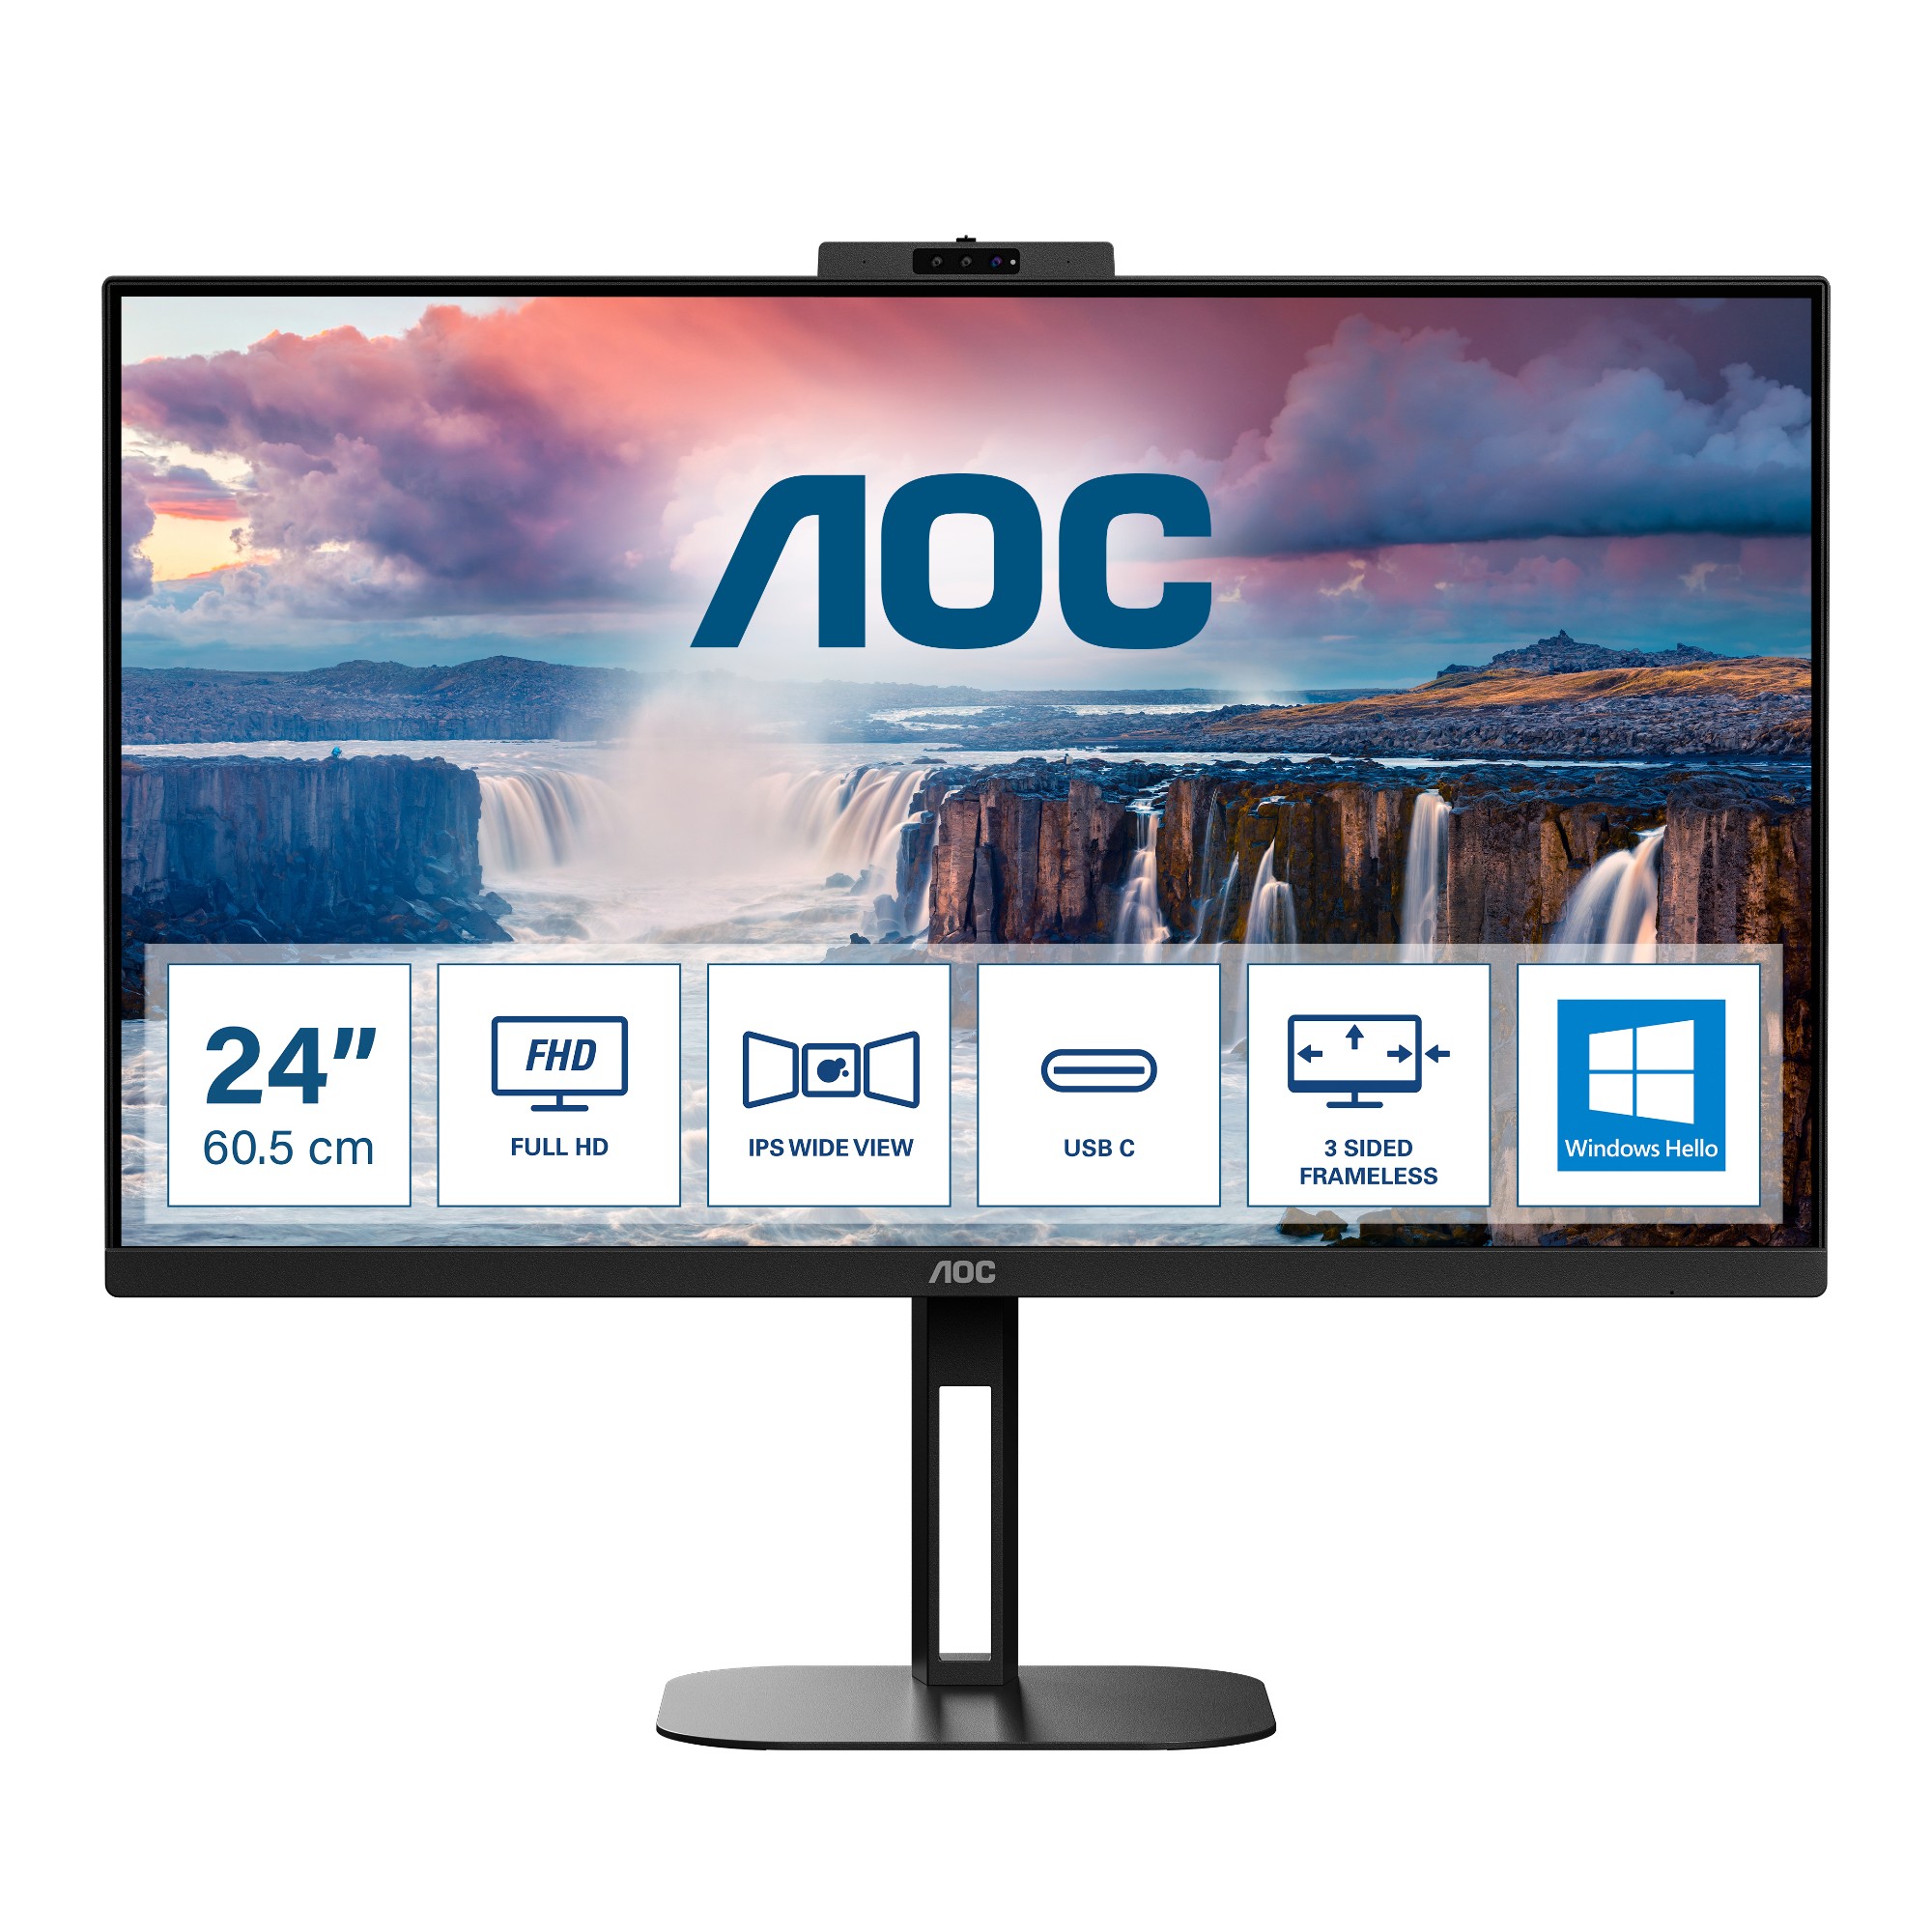 Screen size (inch) 23.8, Panel resolution 1920x1080, Refresh rate 75 Hz, Response time MPRT 1 ms, Panel type IPS, USB-C connectivity USB-C 3.2 x 1 (DP alt mode, upstream, power delivery up to 65 W), HDMI HDMI 1.4 x 2, Display Port DisplayPort 1.2 x 1, D-S